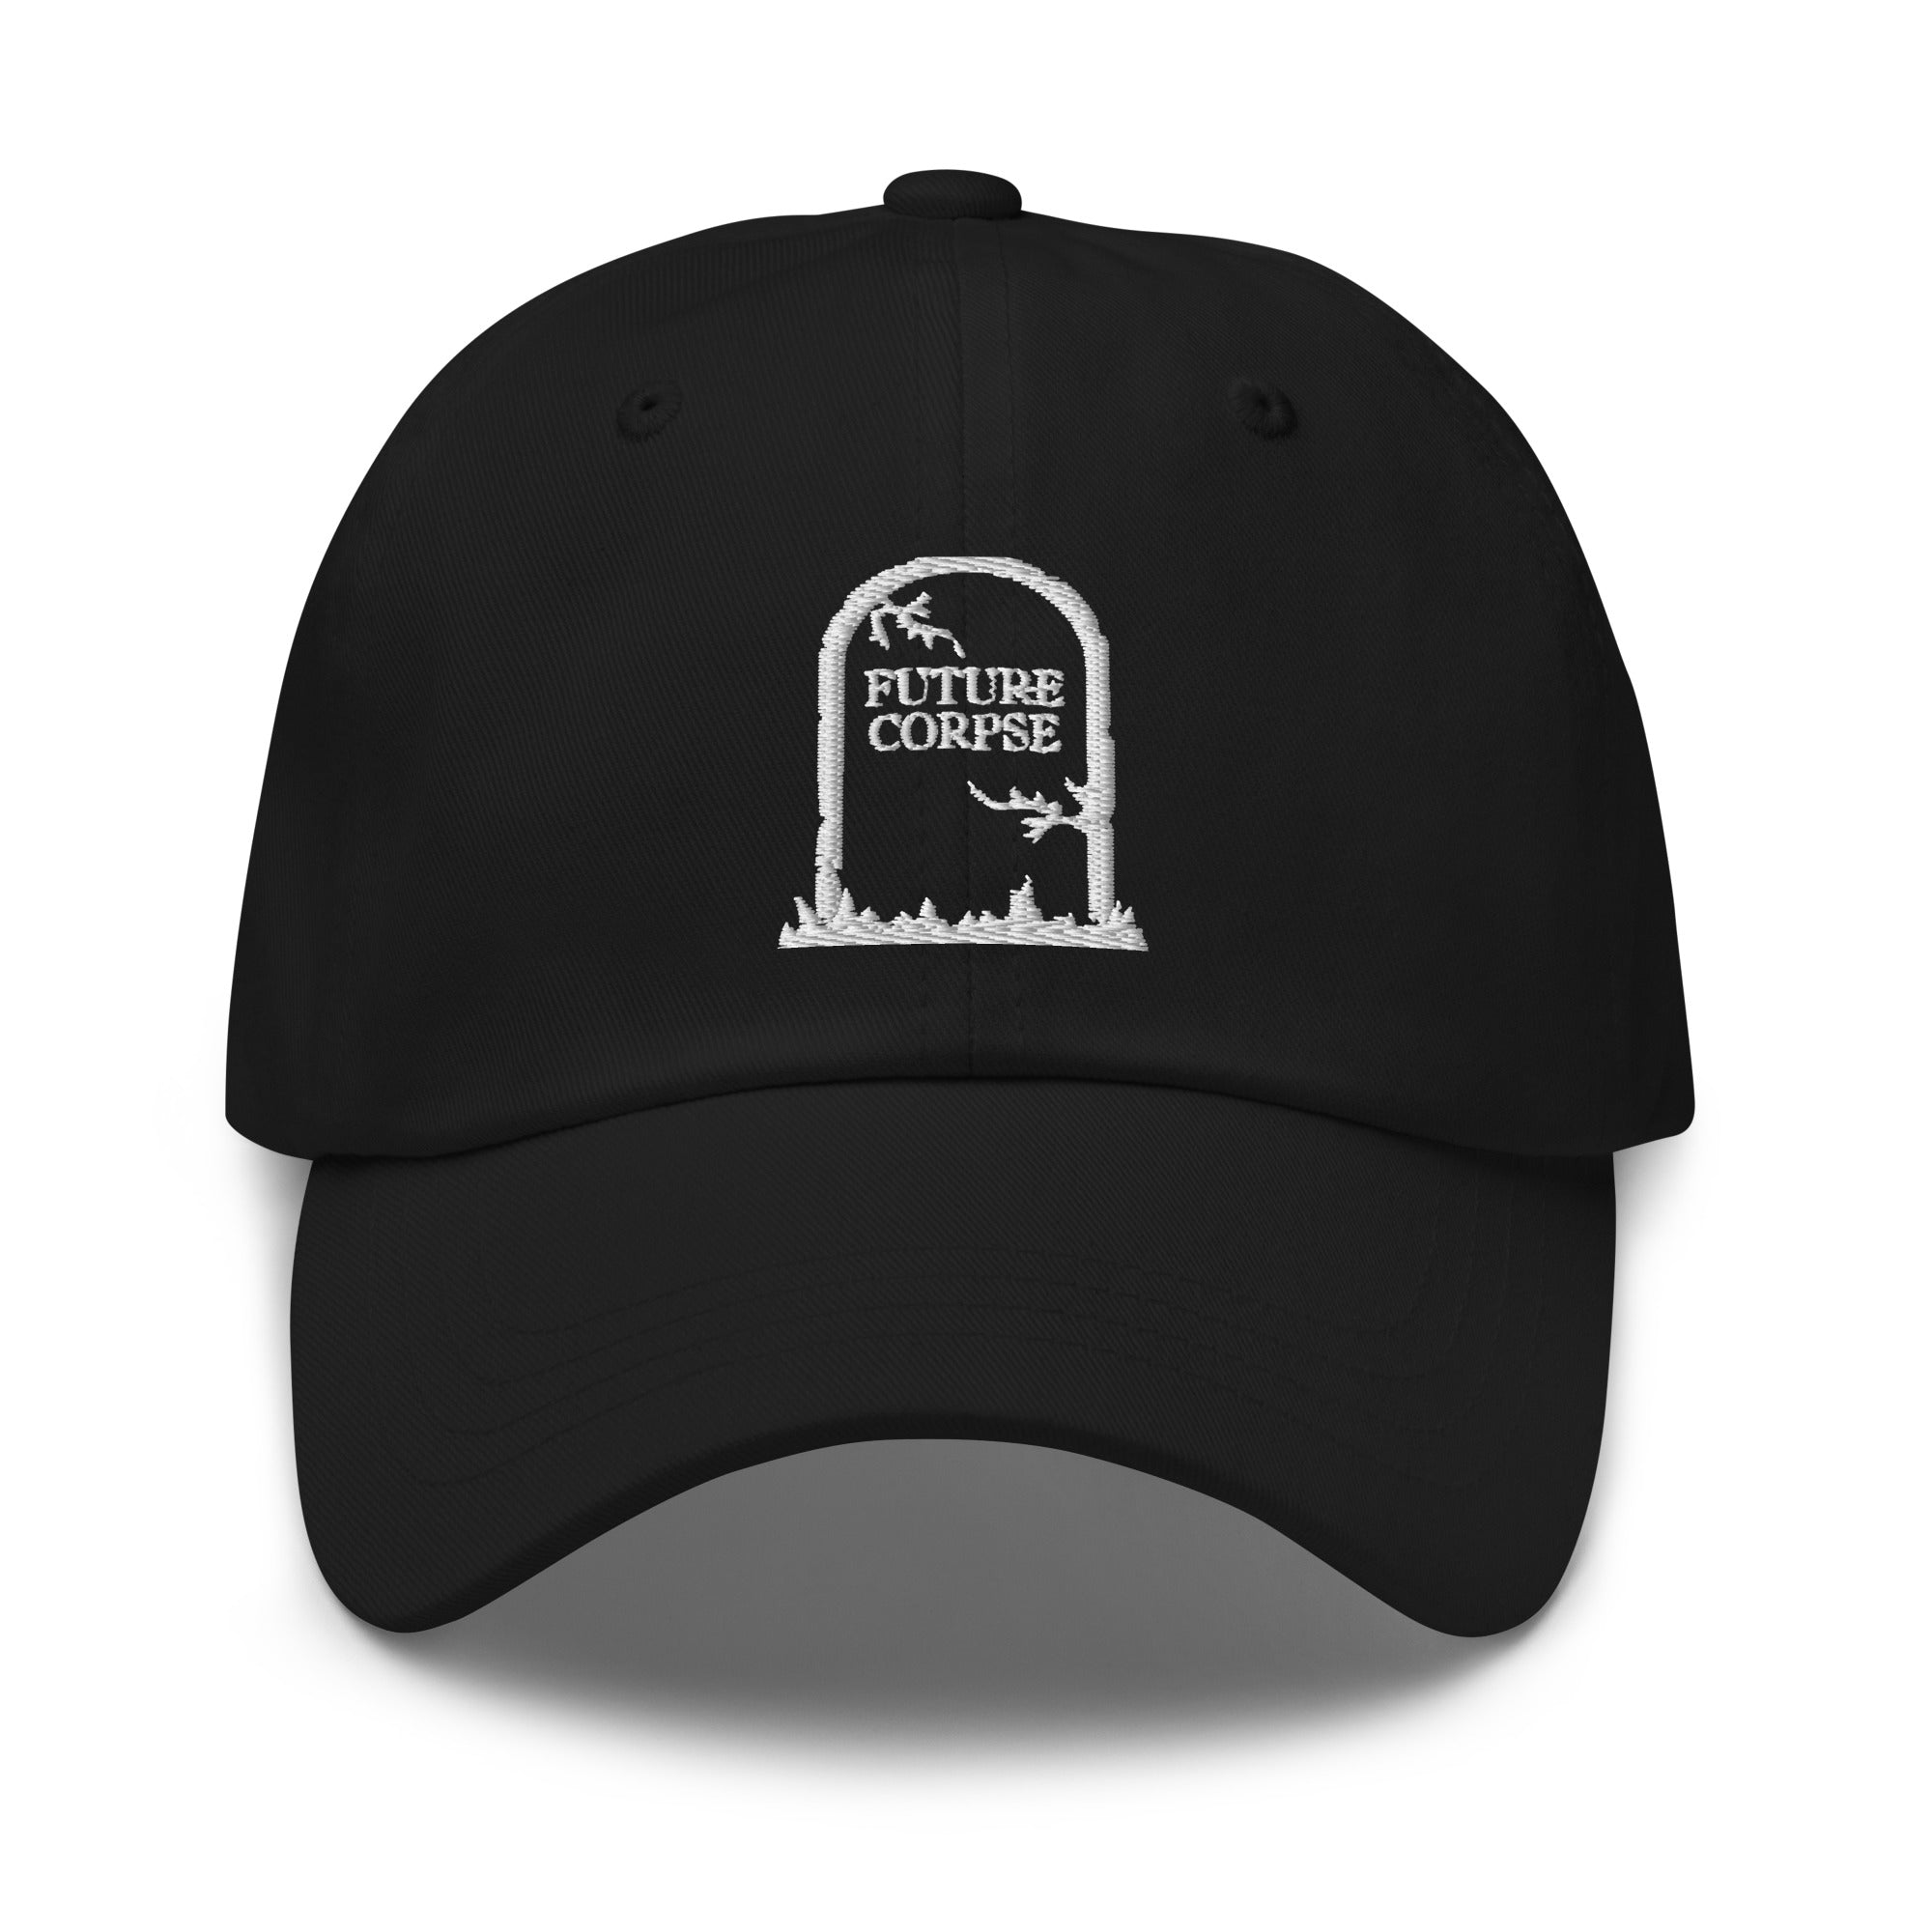 Tomb Stone Future Corpse Embroidered Baseball Cap Goth Clothing Applique Dad hat - Edge of Life Designs